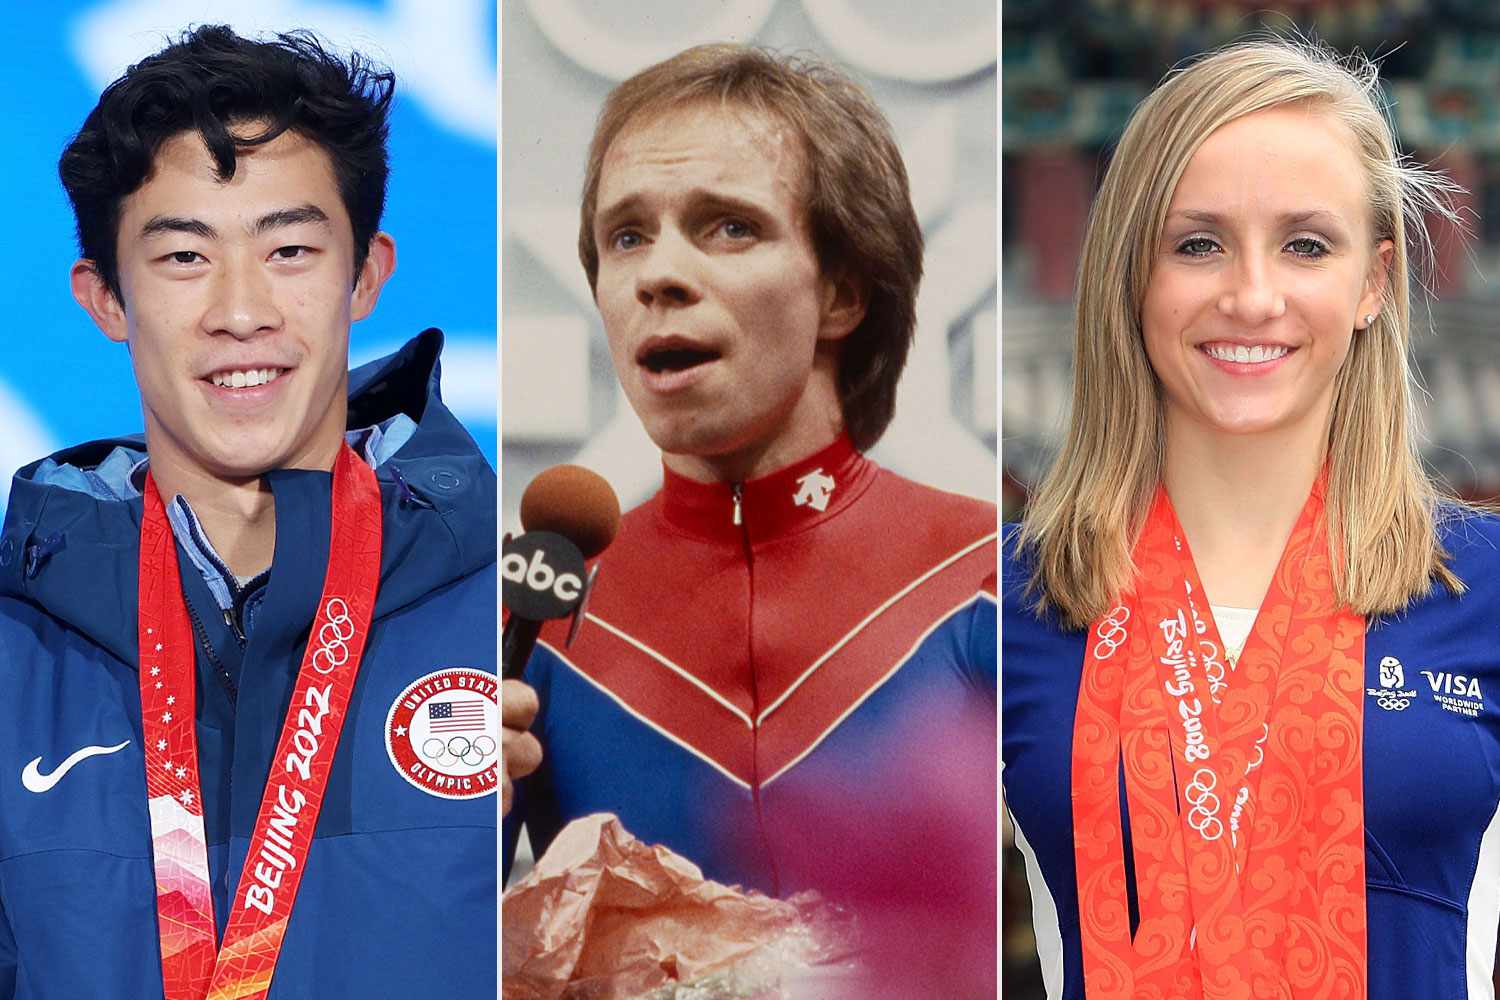 Nathan Chen, Scott Hamilton and Nastia Liukin Reveal Which Other Sports They'd Want to Compete In (Exclusive)